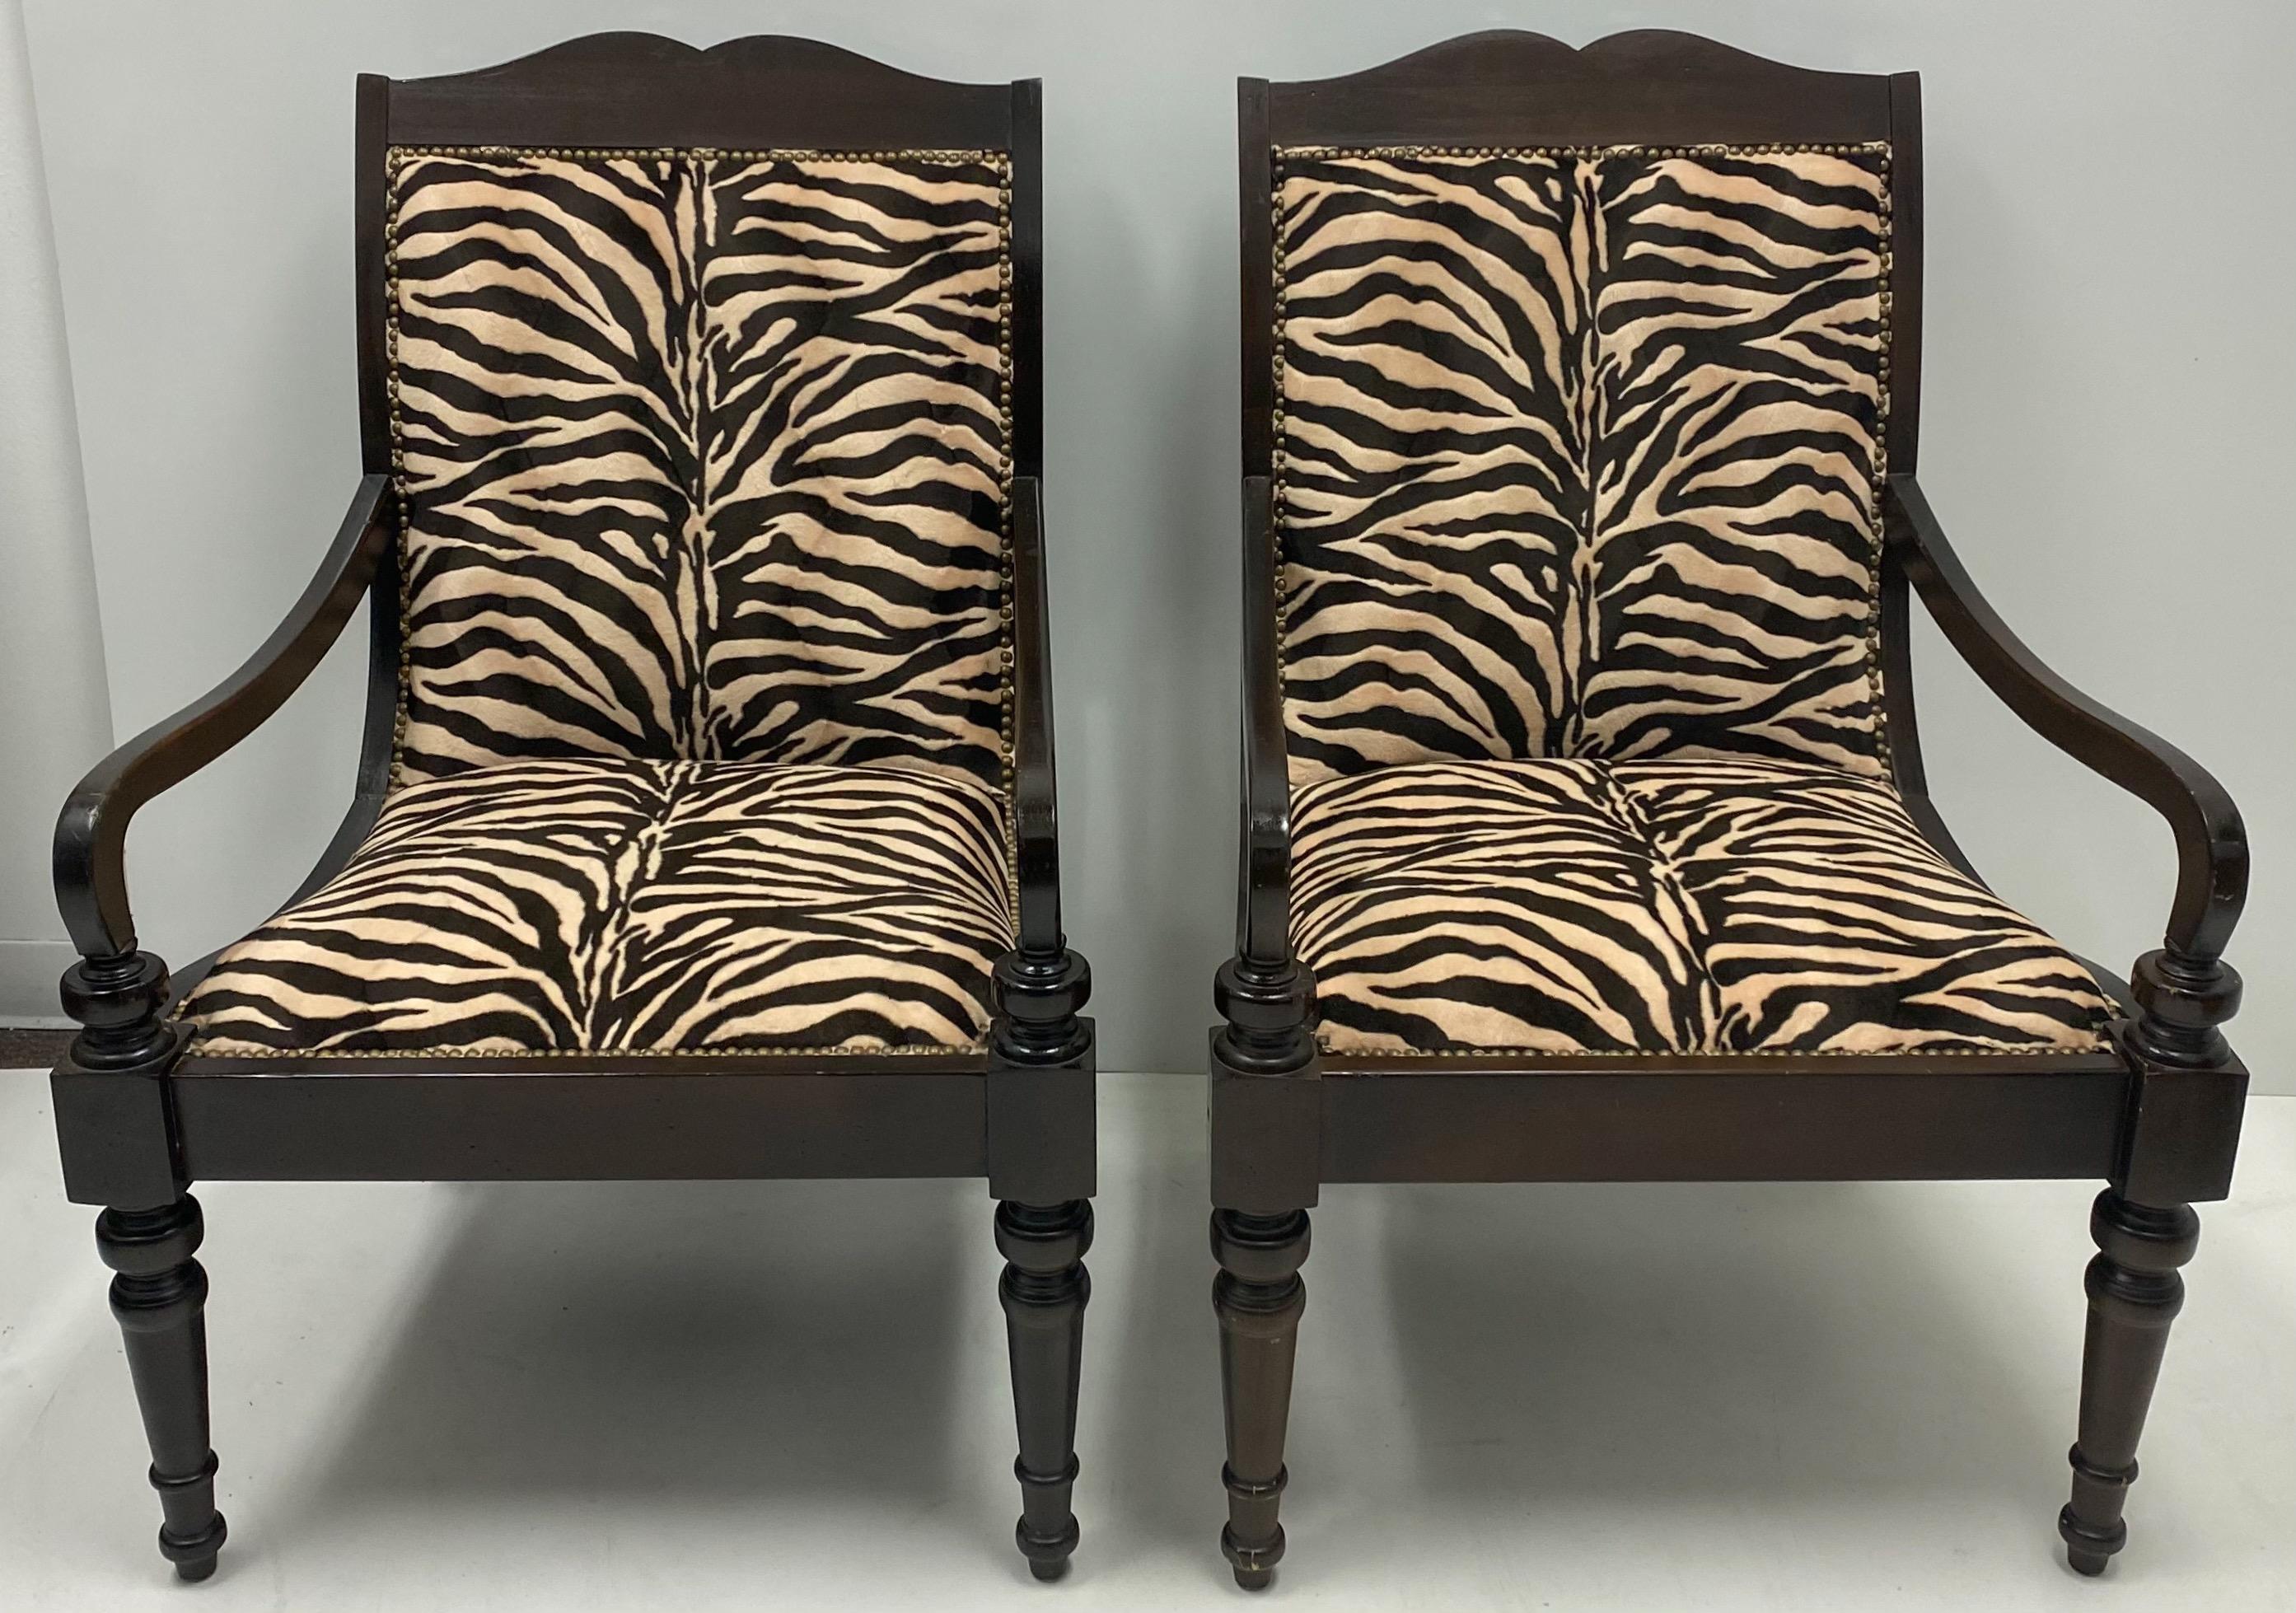 Ebonized British Colonial Style Lillian August Chairs in Zebra Velvet, Pair In Good Condition In Kennesaw, GA